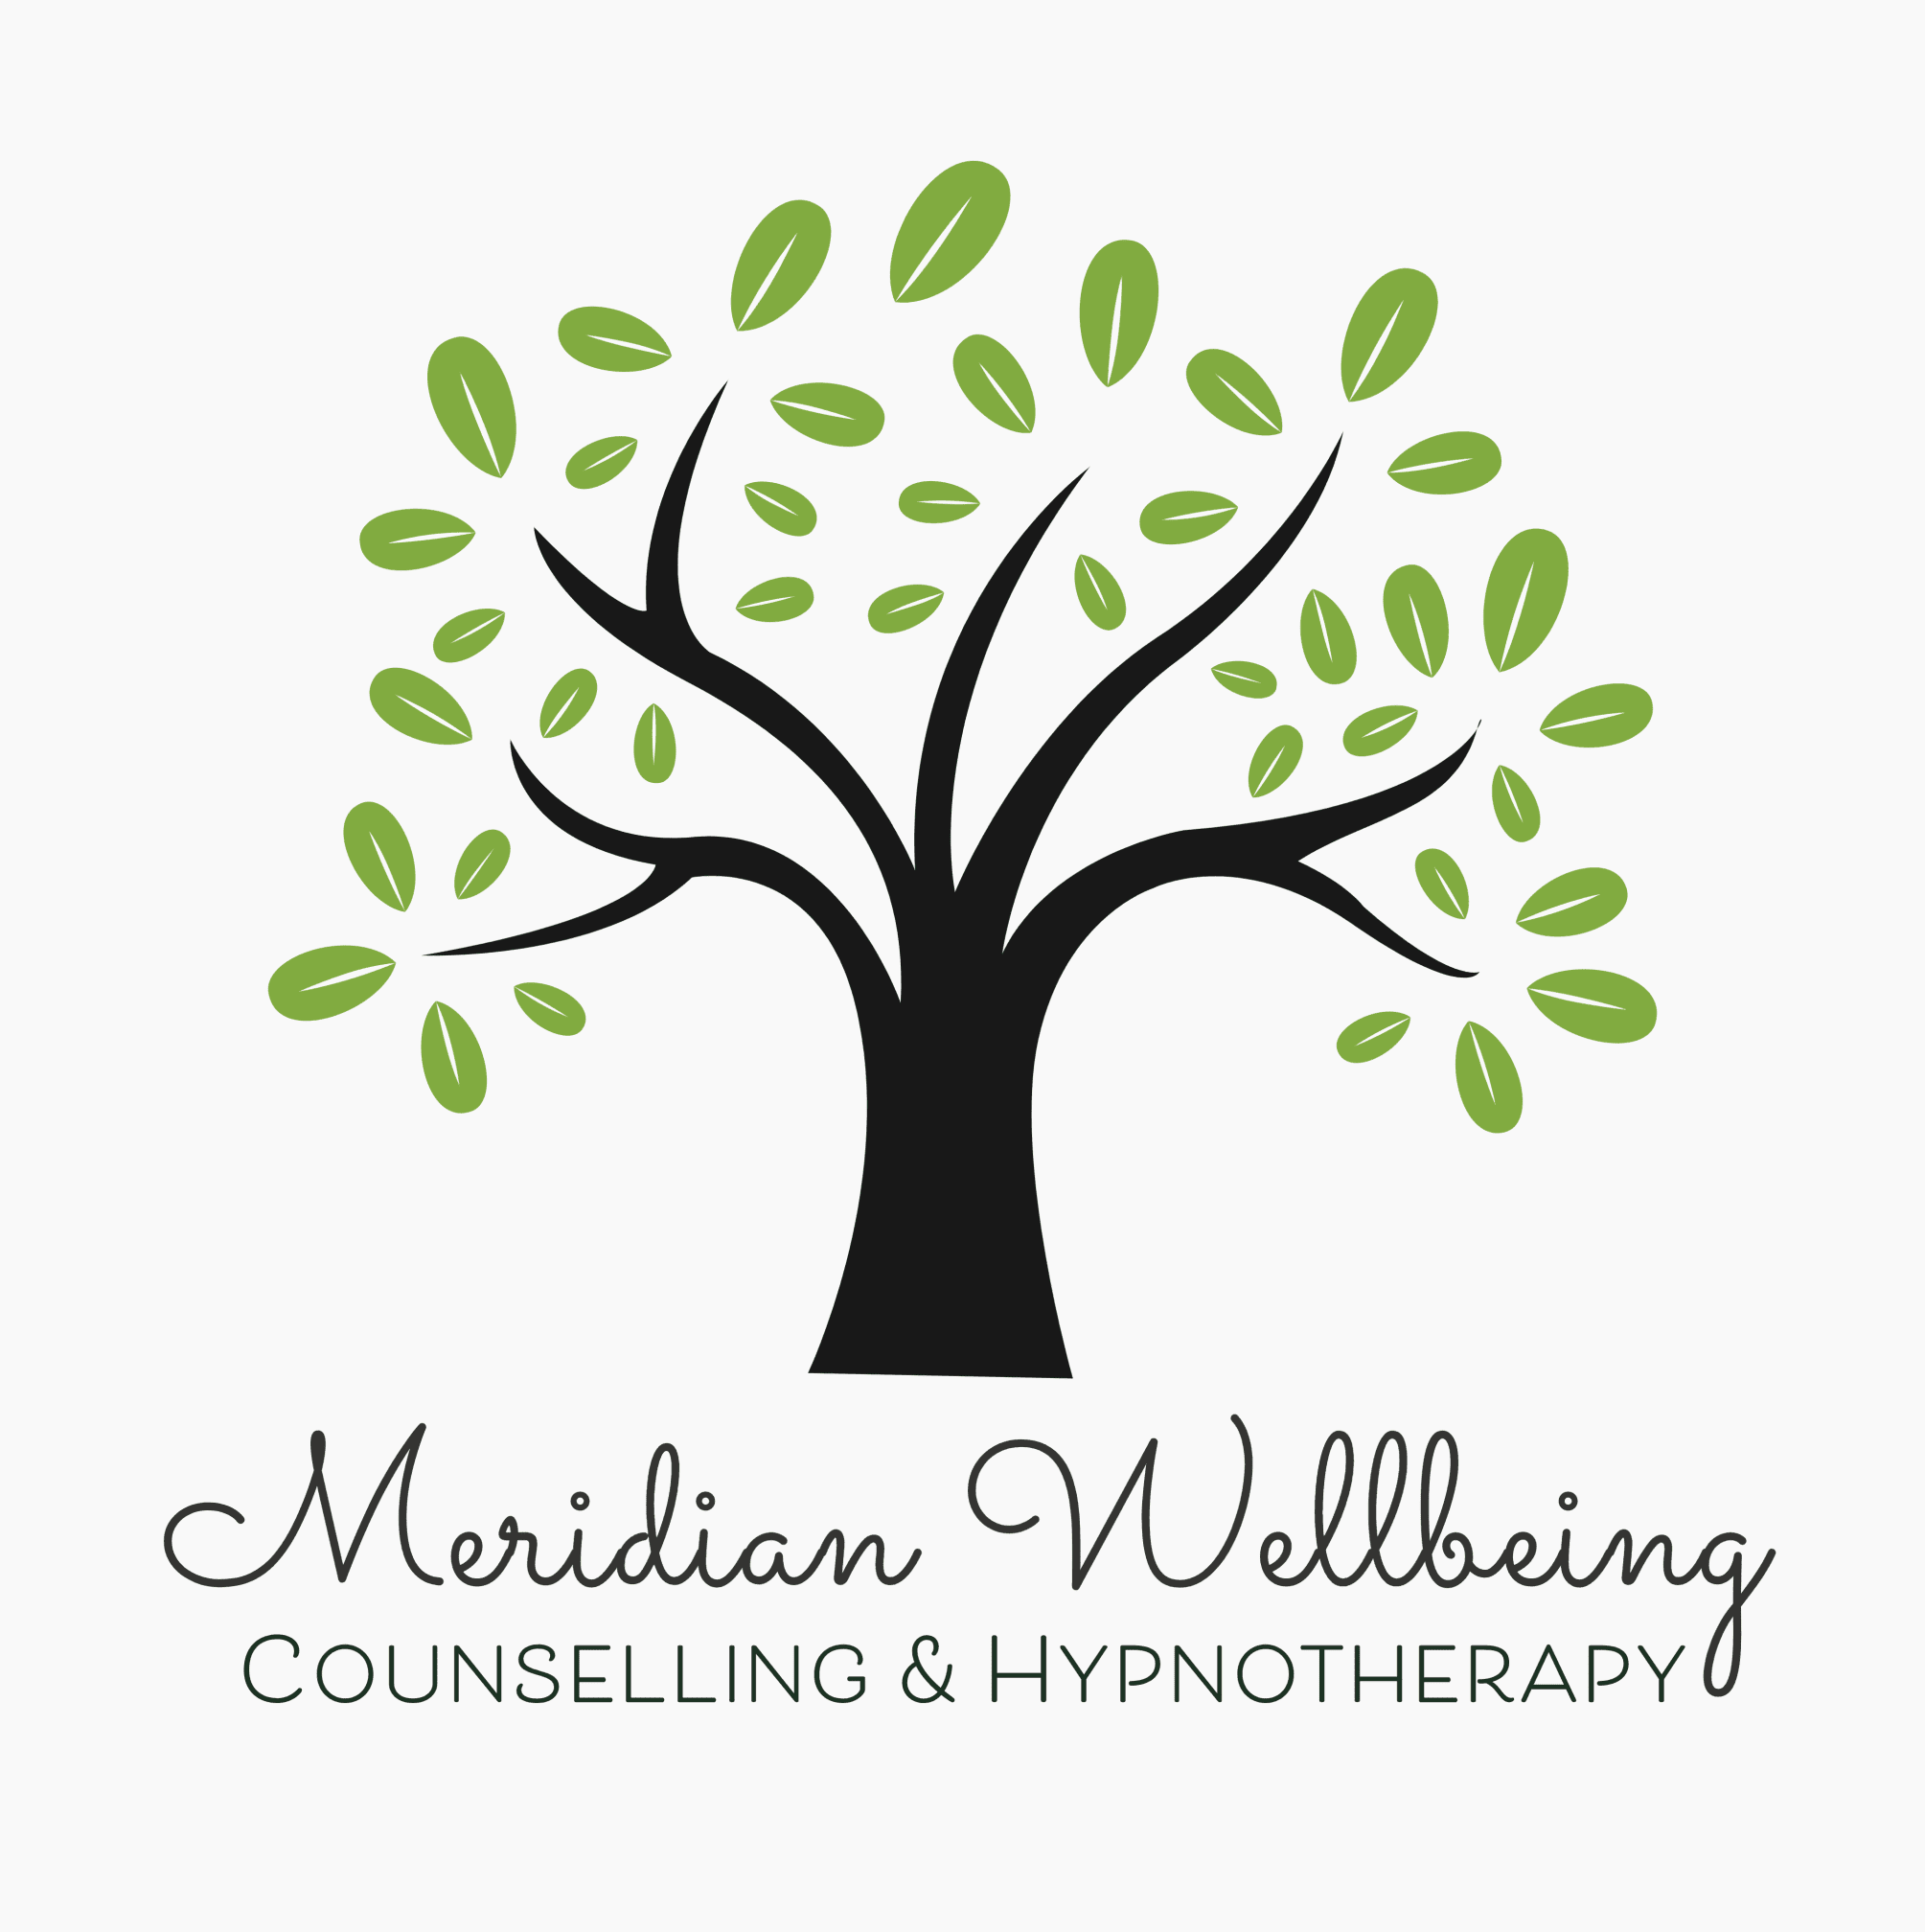 Images Meridian Wellbeing, Counselling & Hypnotherapy